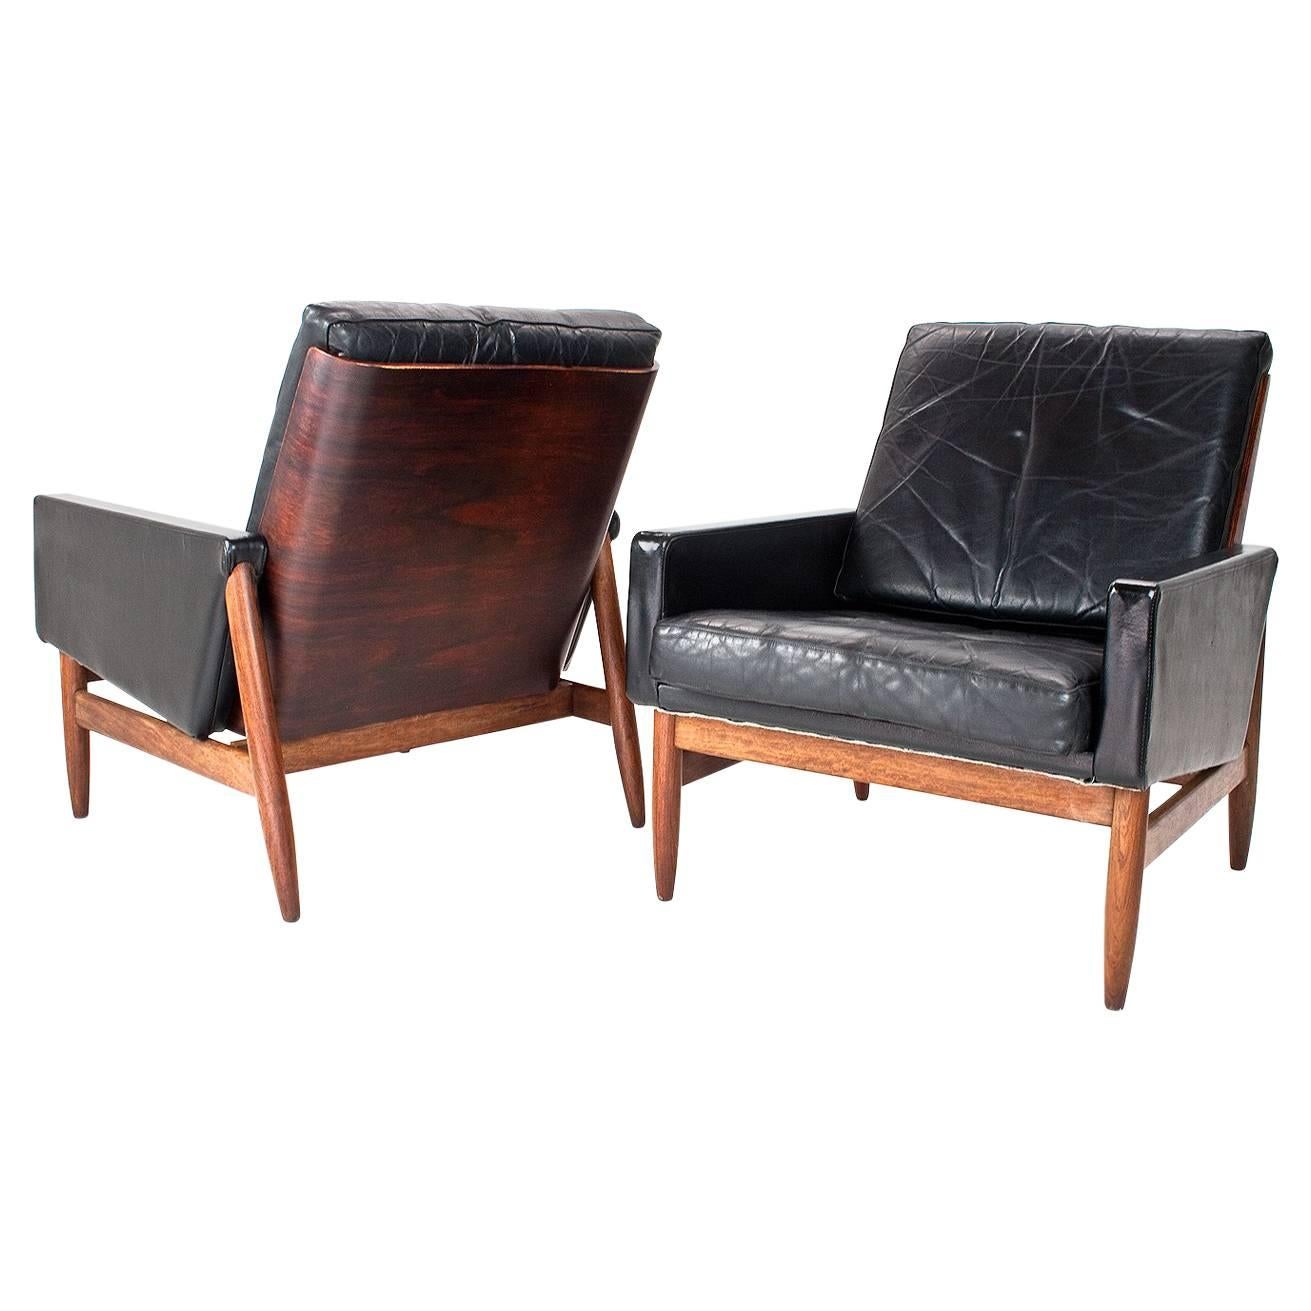 1950s Set of Scandinavian Mid-Century Leather, Teak and Rosewood Lounge Chairs